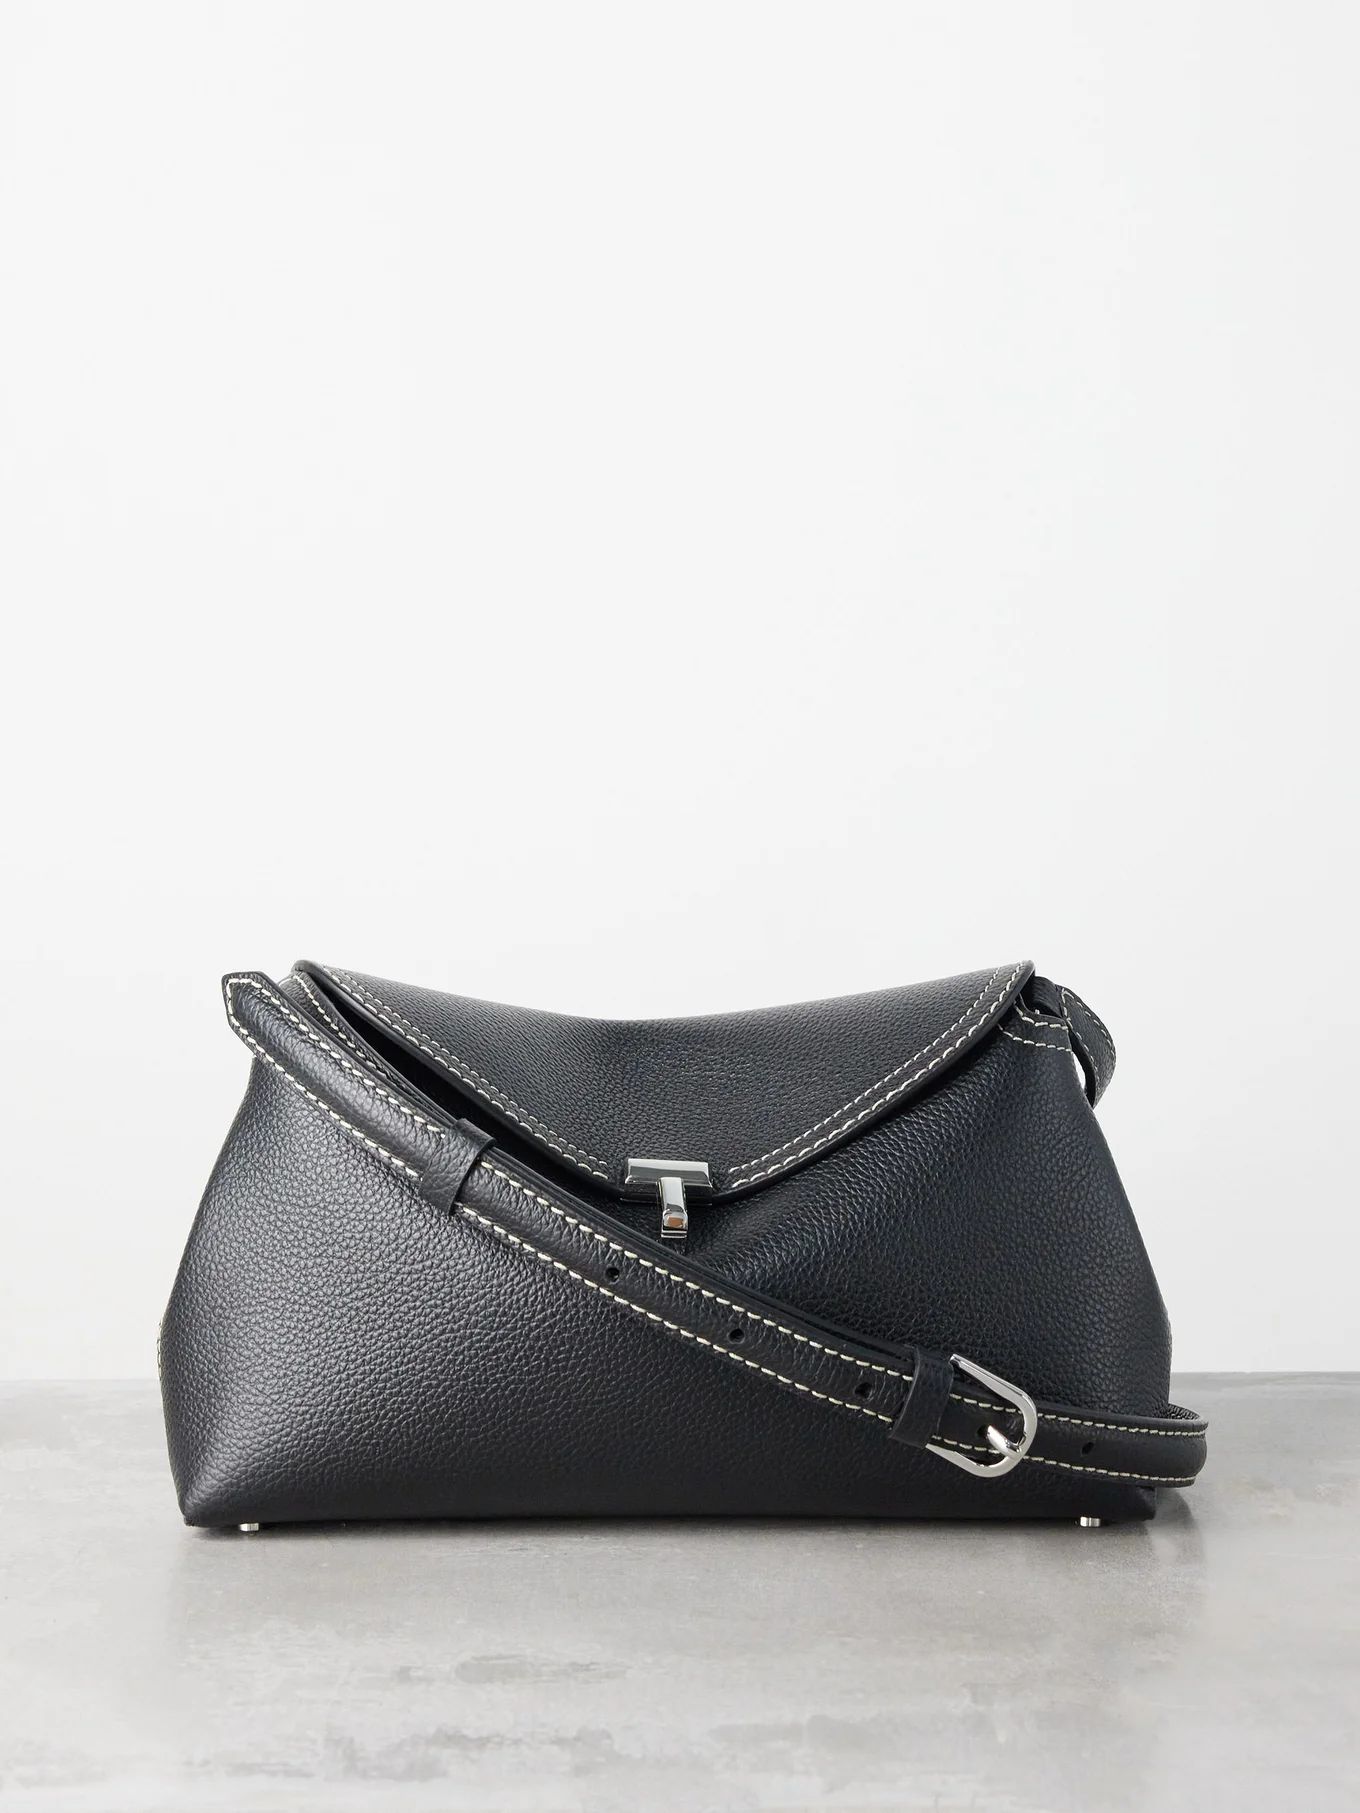 T-lock leather cross-body bag | Matches (US)